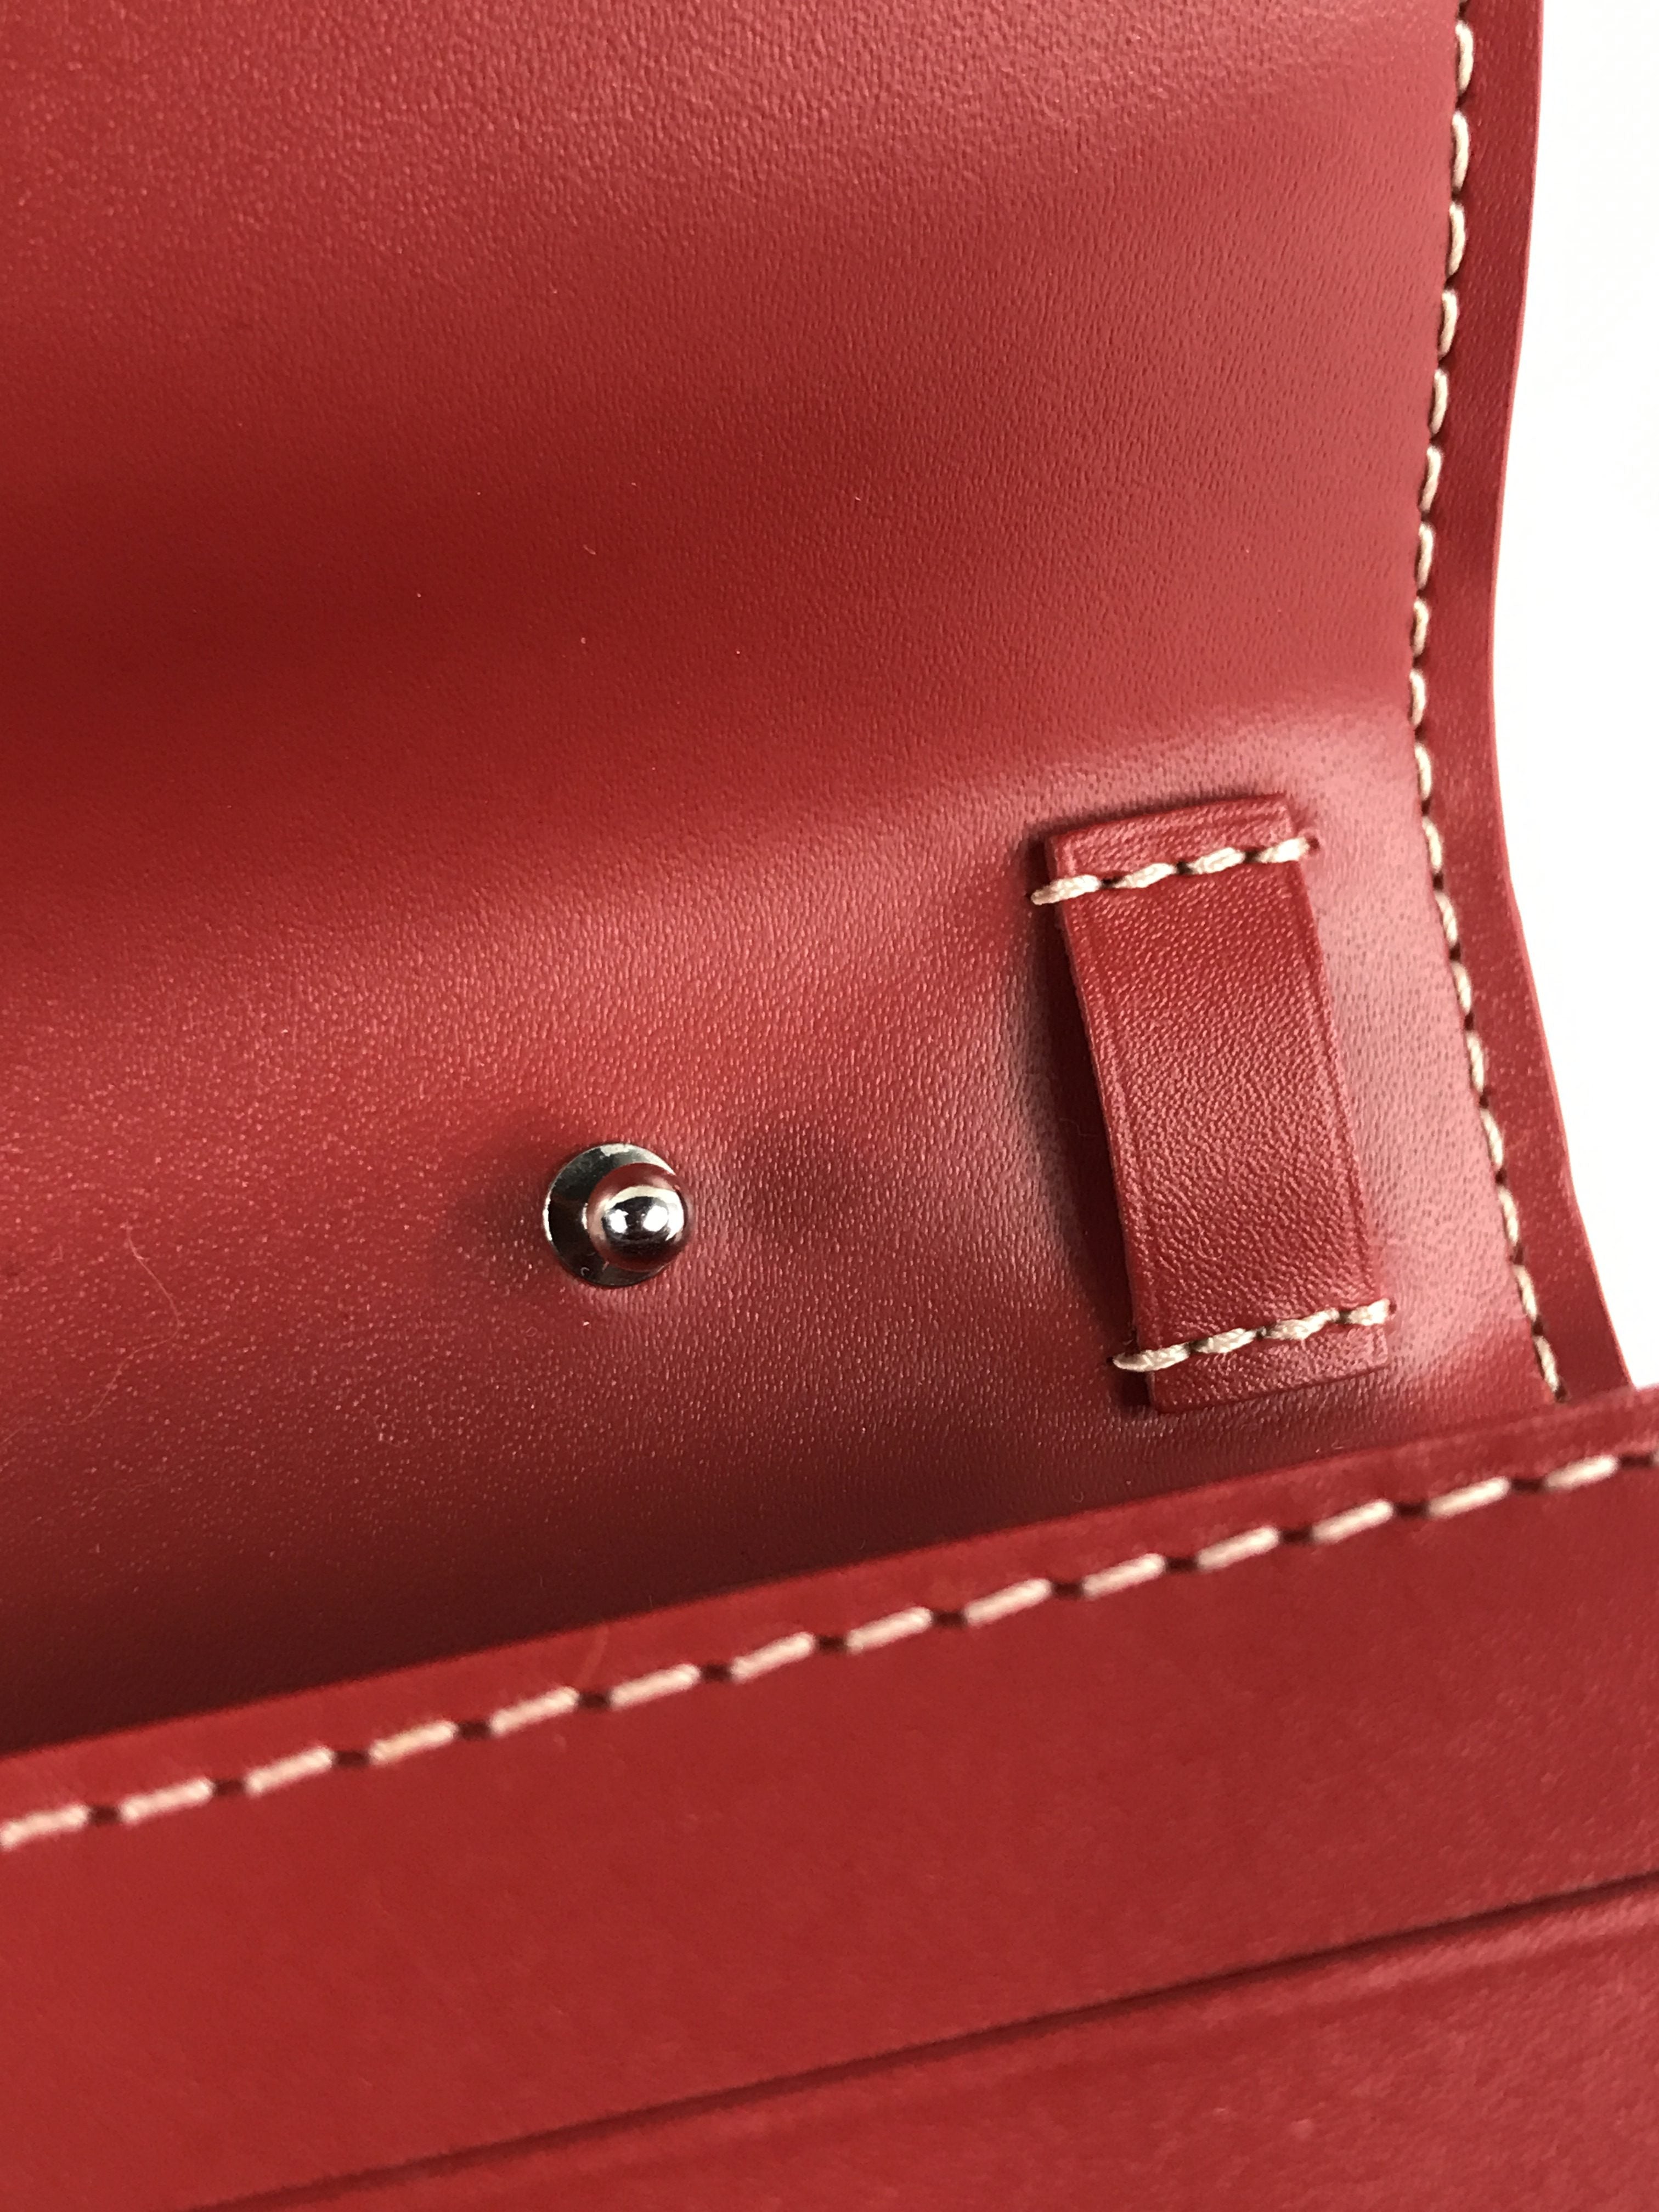 Red Canvas and Red Calfskin Leather Varenne Continental Wallet